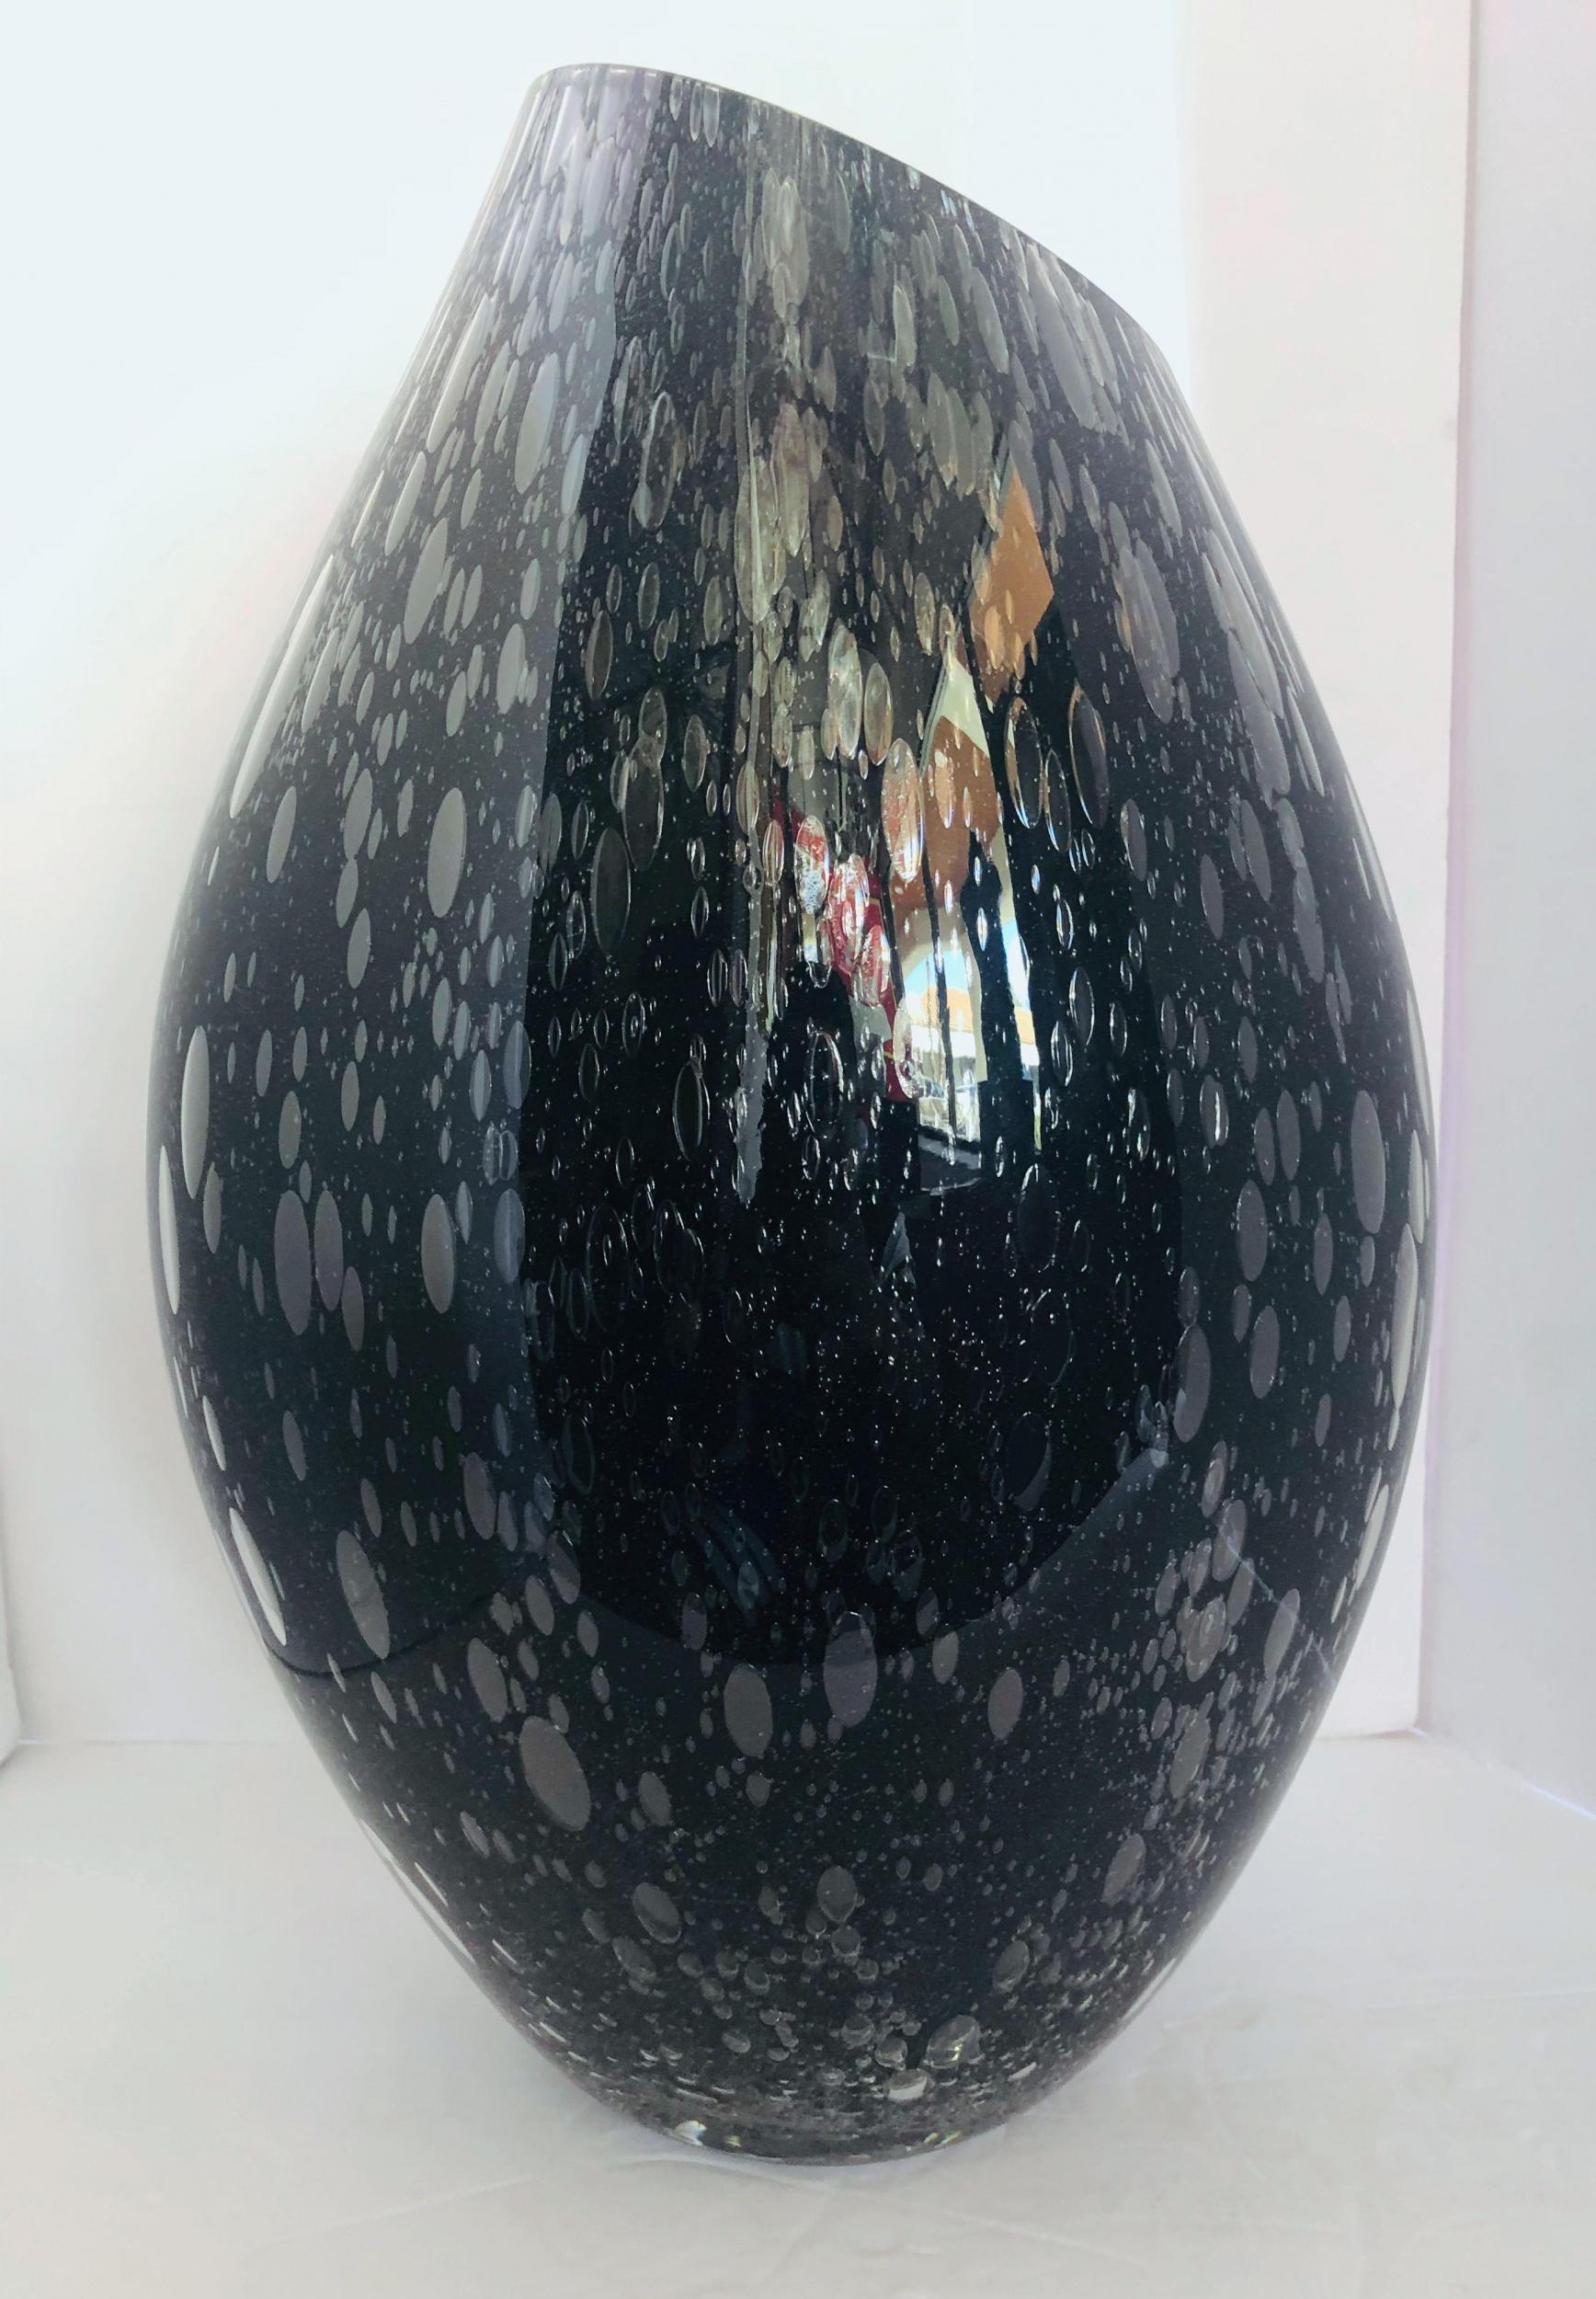 Two Signed Italian Vases w/ Black Murano Glass by Alberto Donà, 1980s For Sale 3